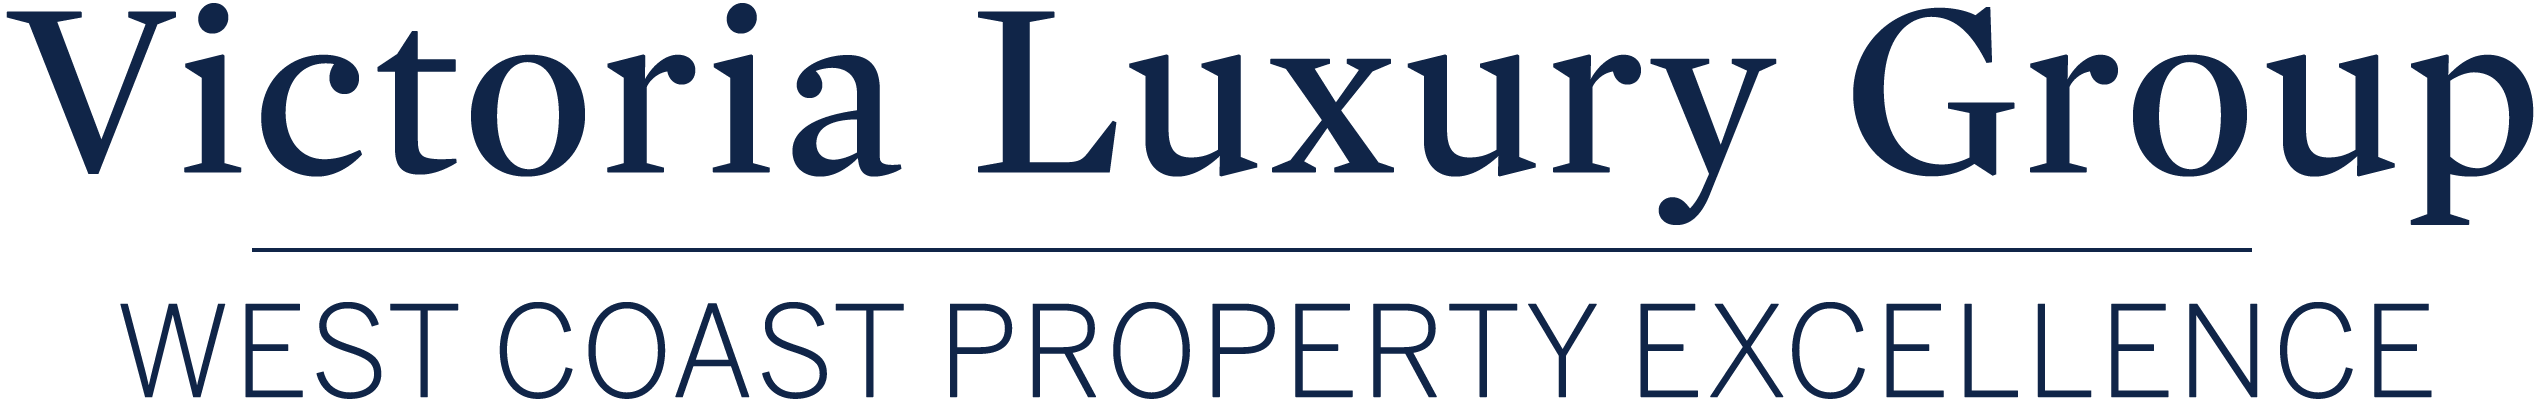 Victoria Luxury Group | West Coast Property Excellence | Victoria BC logo